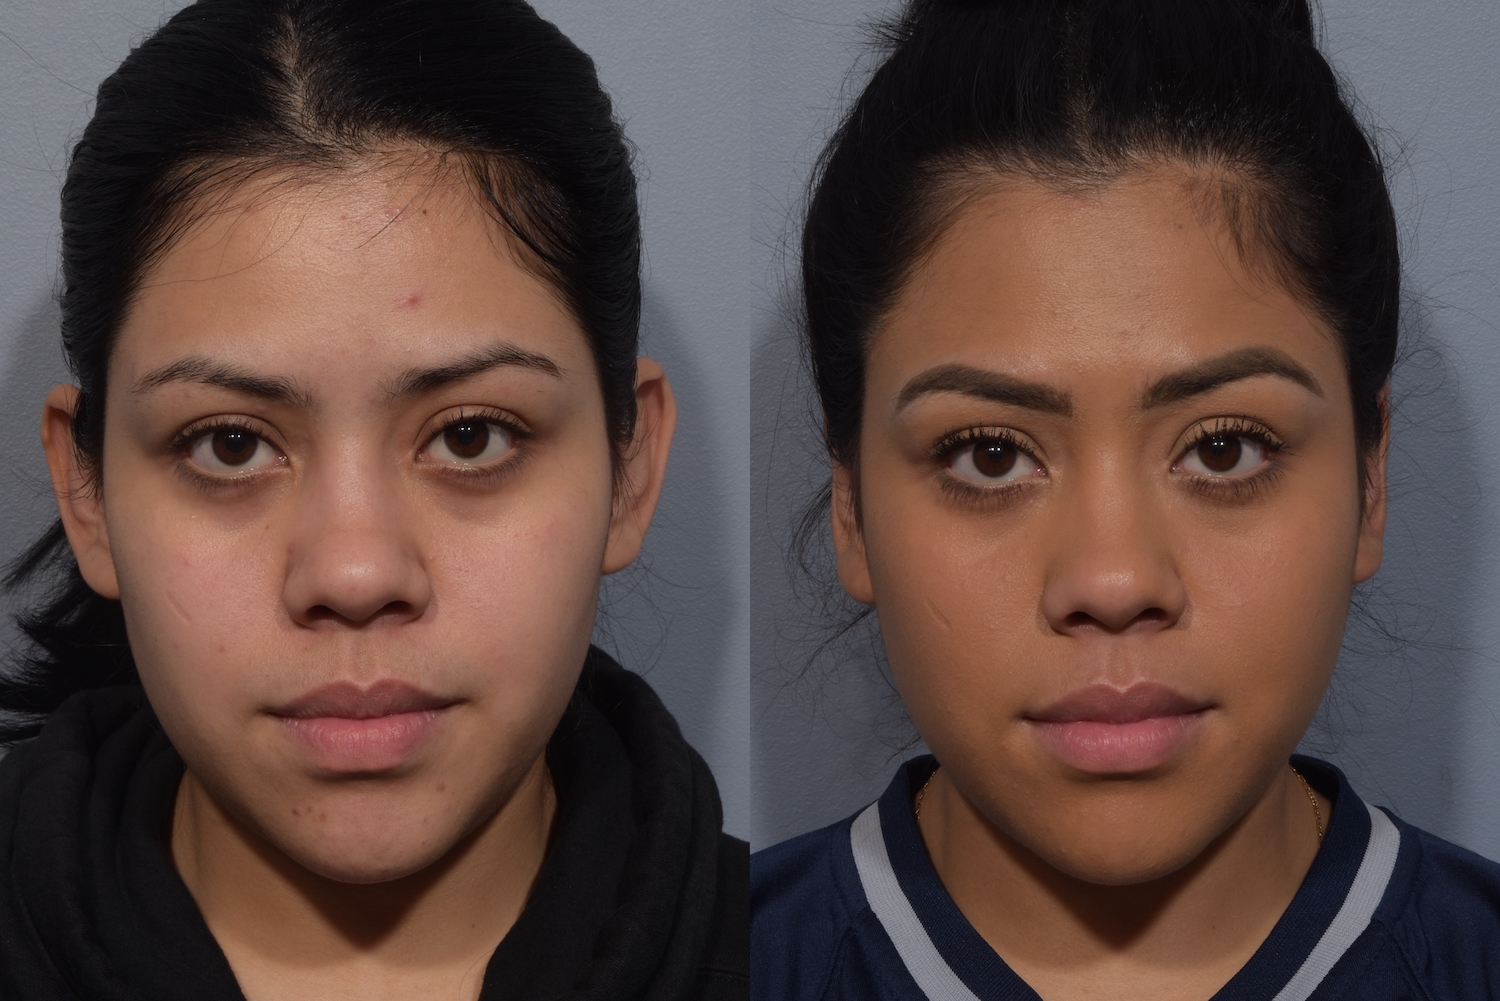 patient before and after otoplasty